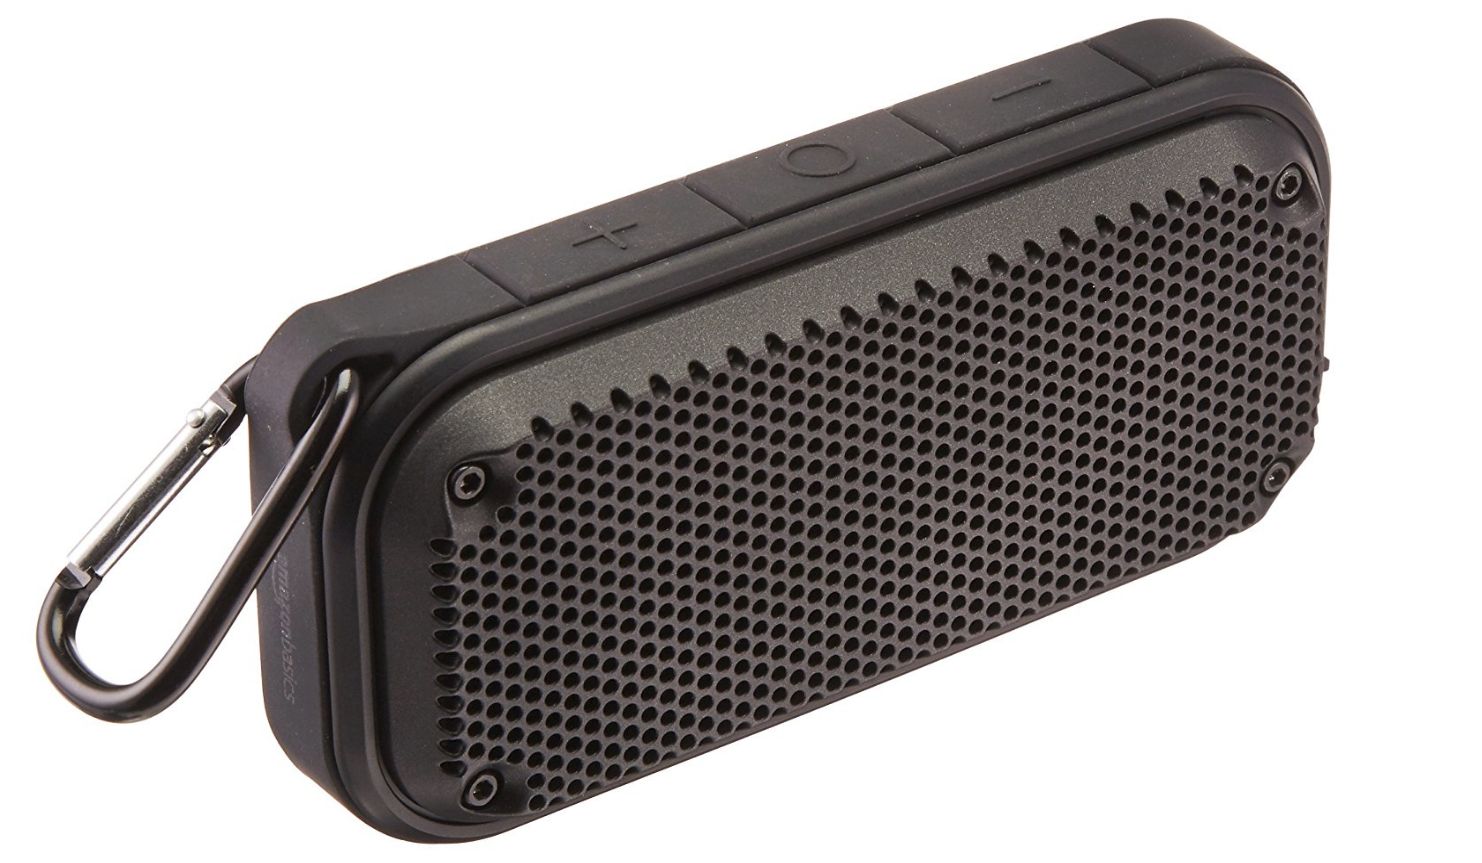 Gift ideas for coworkers - Amazon Basics Shockproof and Waterproof Bluetooth Wireless Speaker